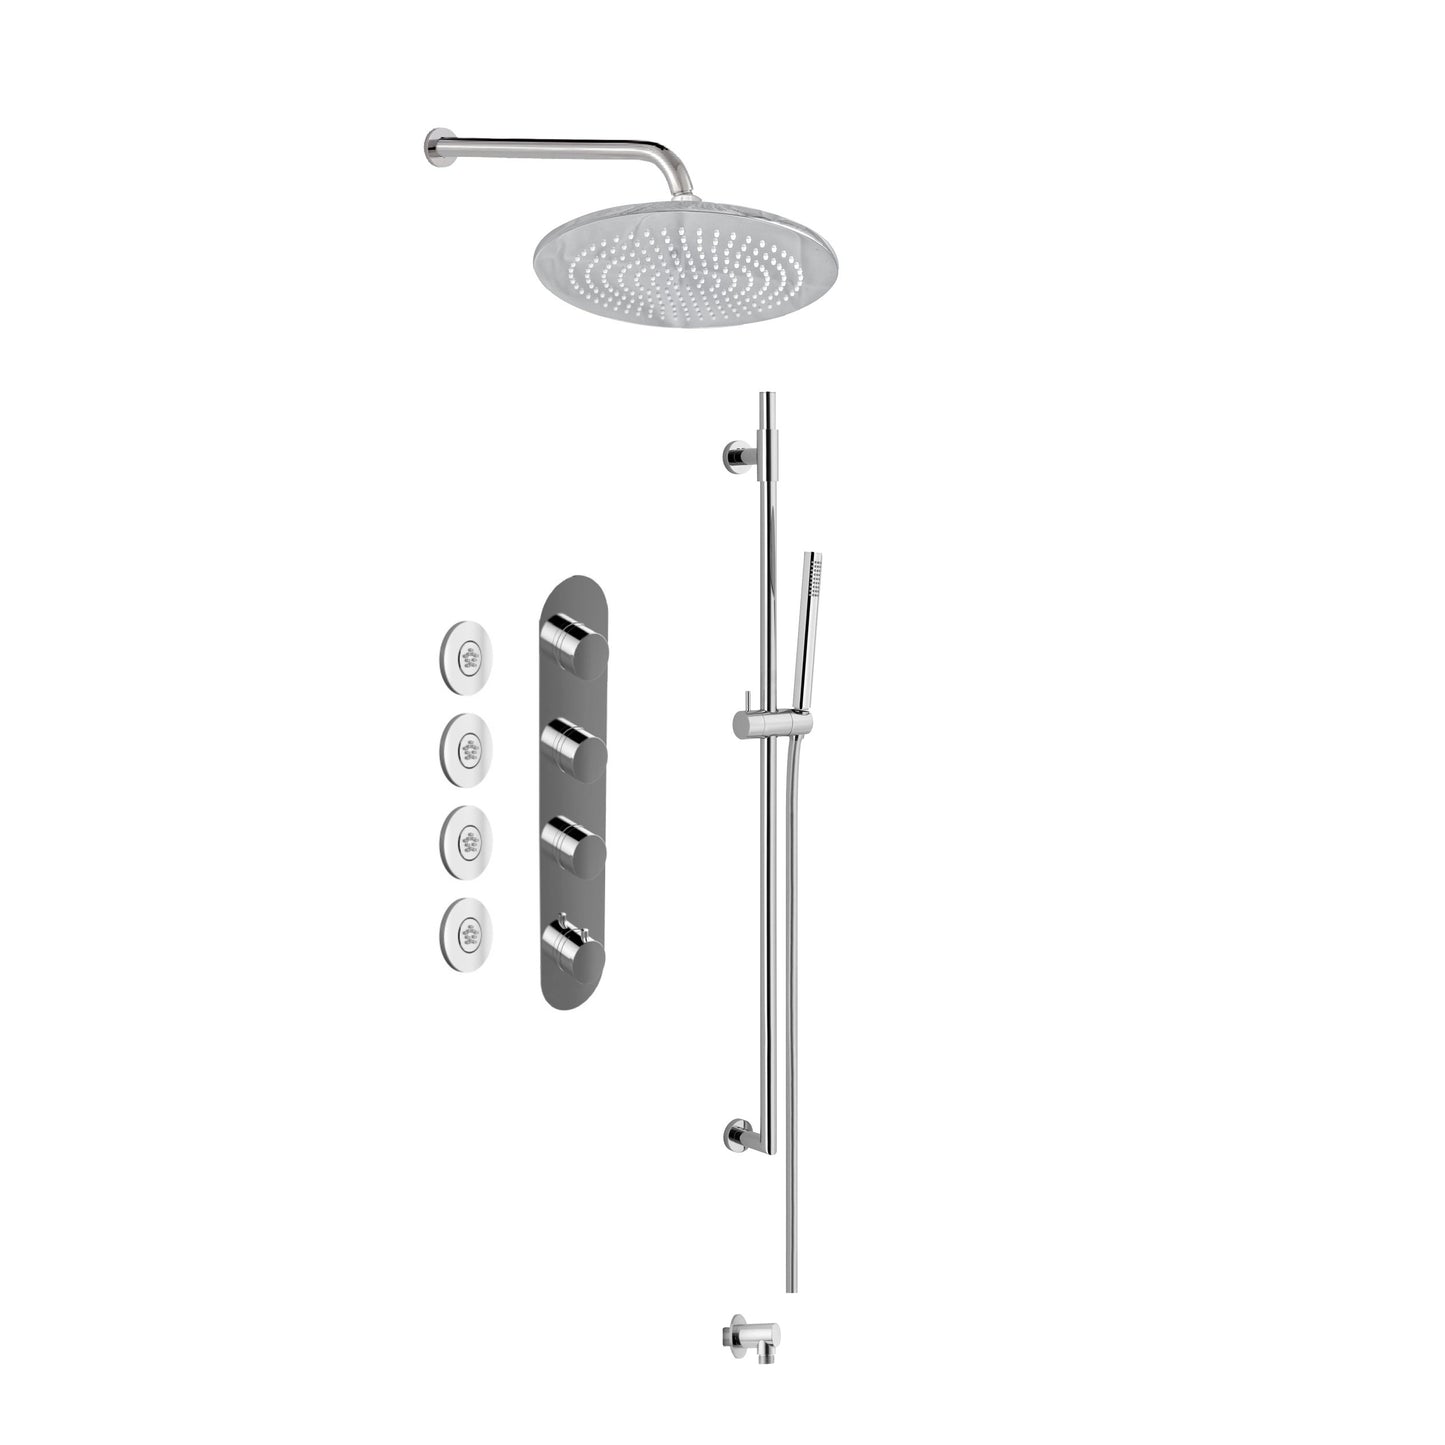 Aquadesign Products Shower Kit (Contempo X1800CT-A) - Chrome